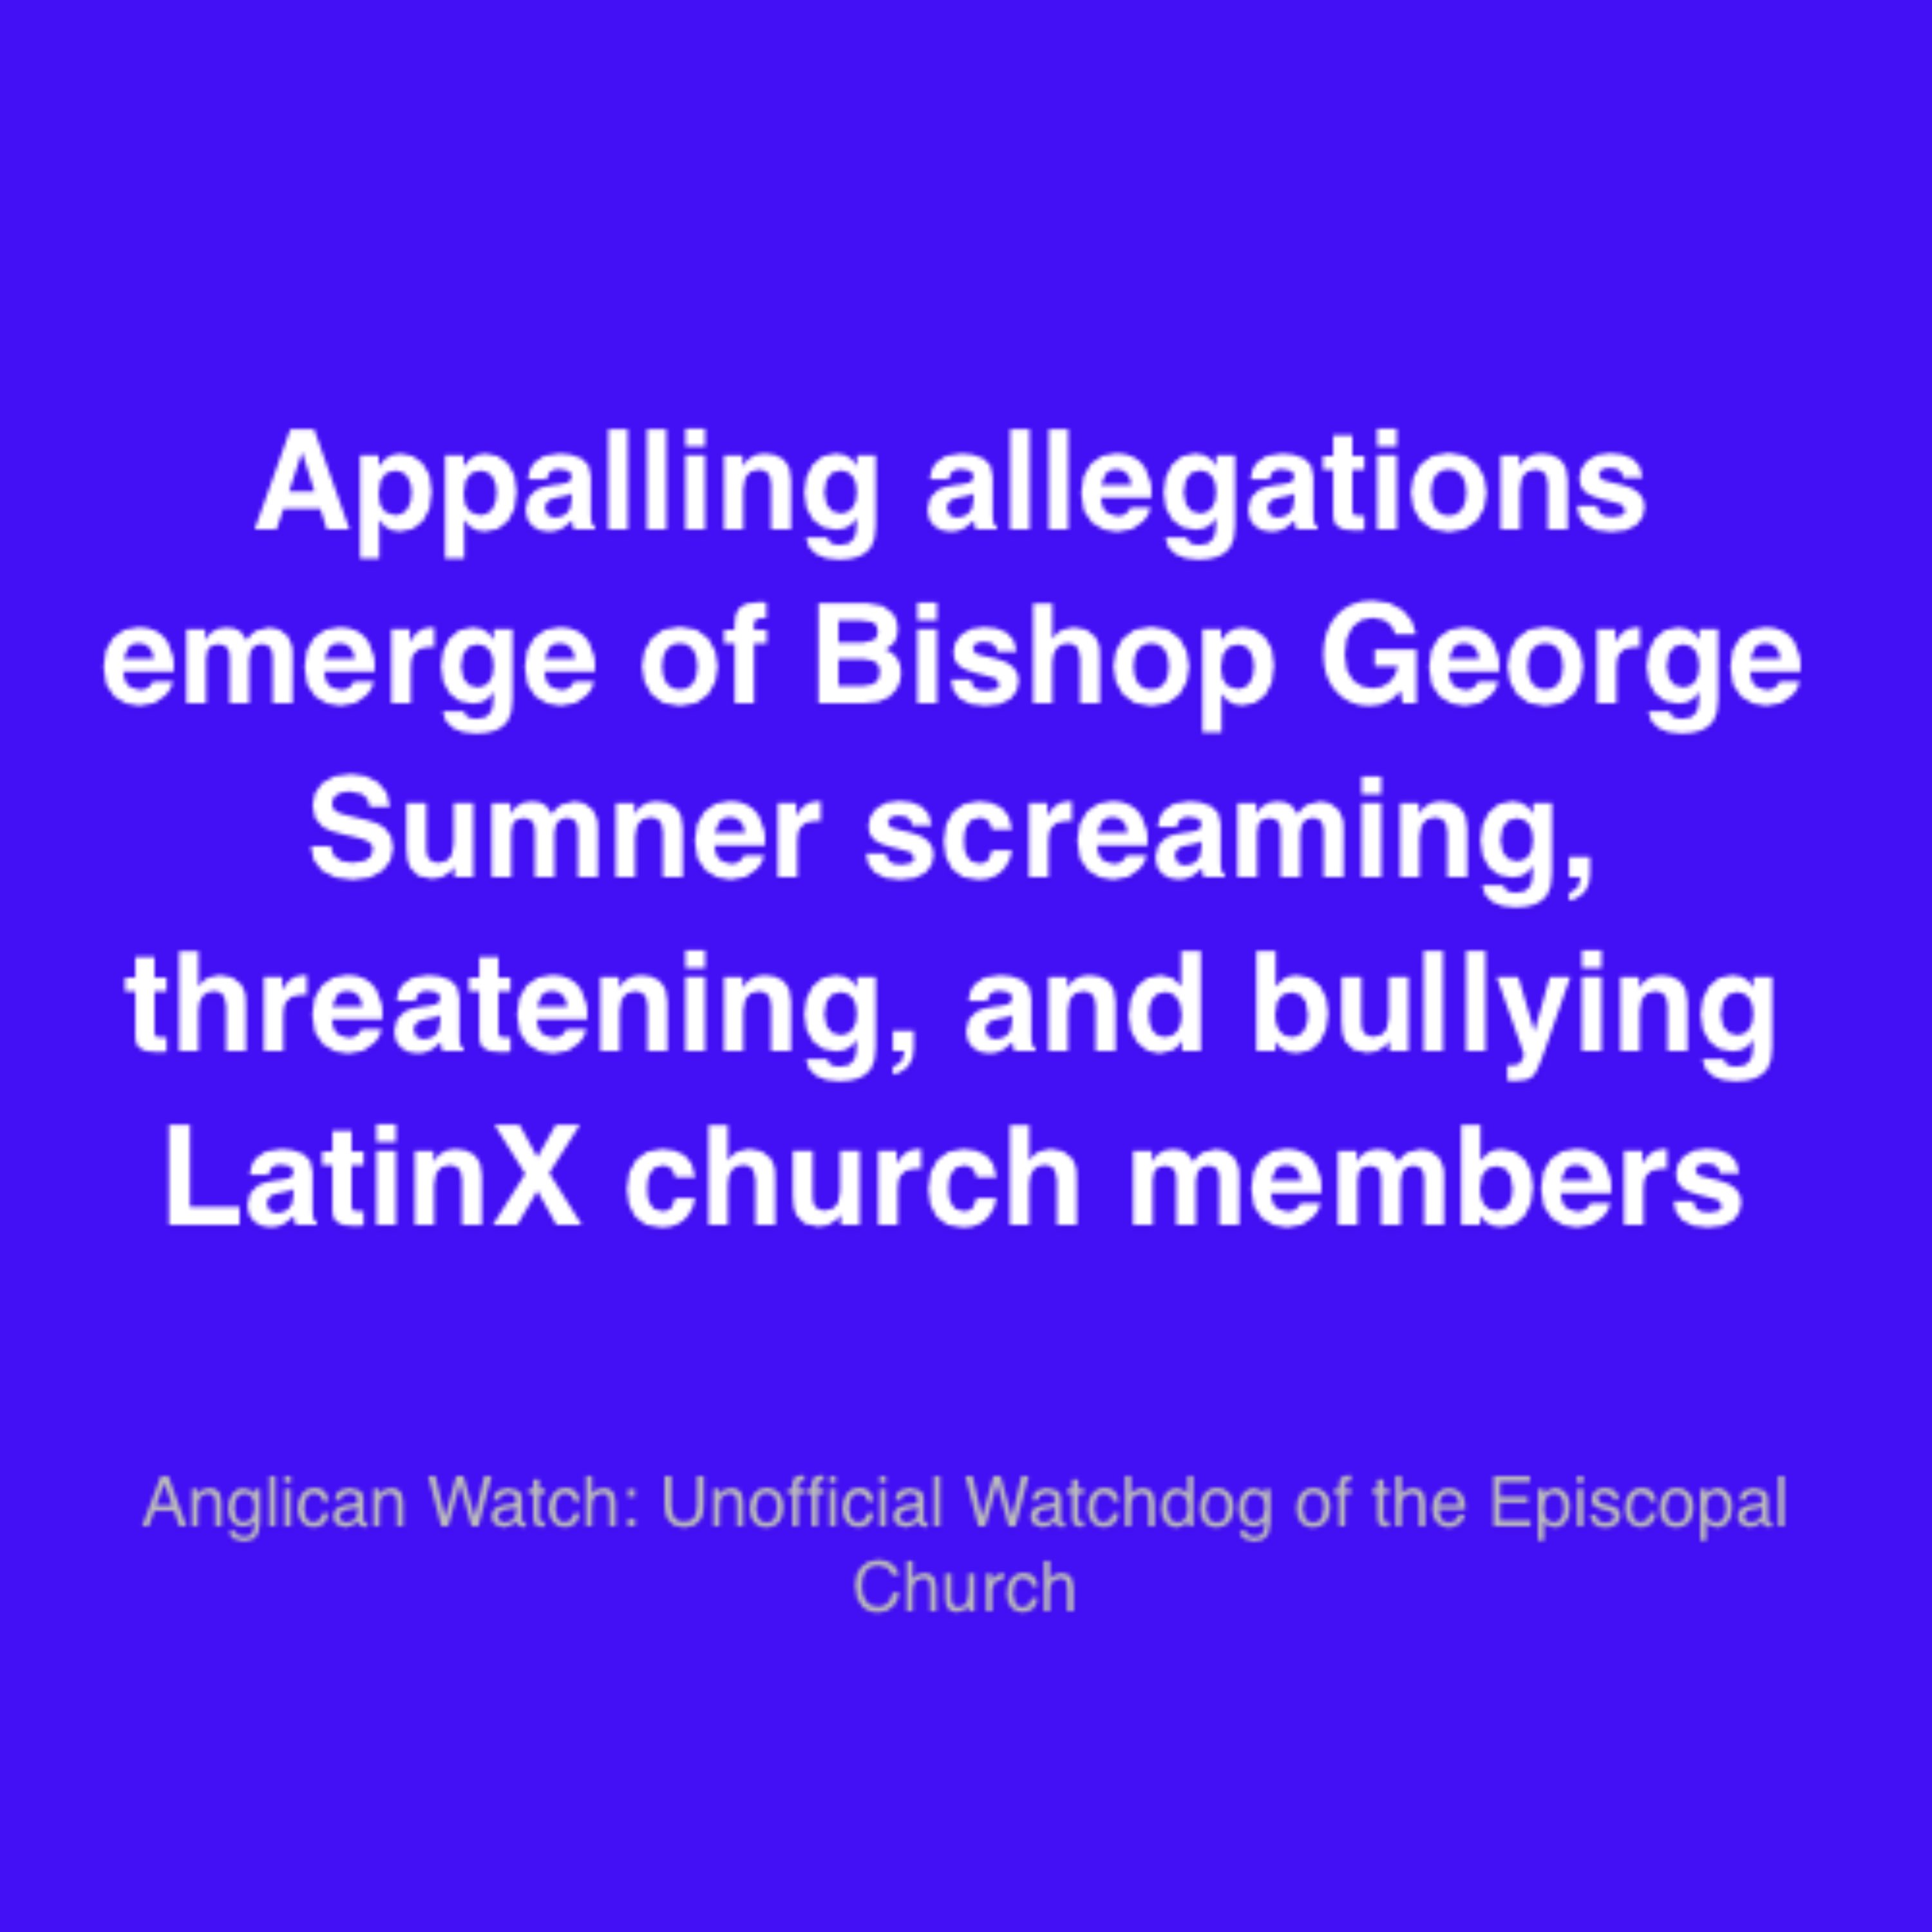 Appalling allegations emerge of Bishop George Sumner screaming, threatening, and bullying LatinX church members